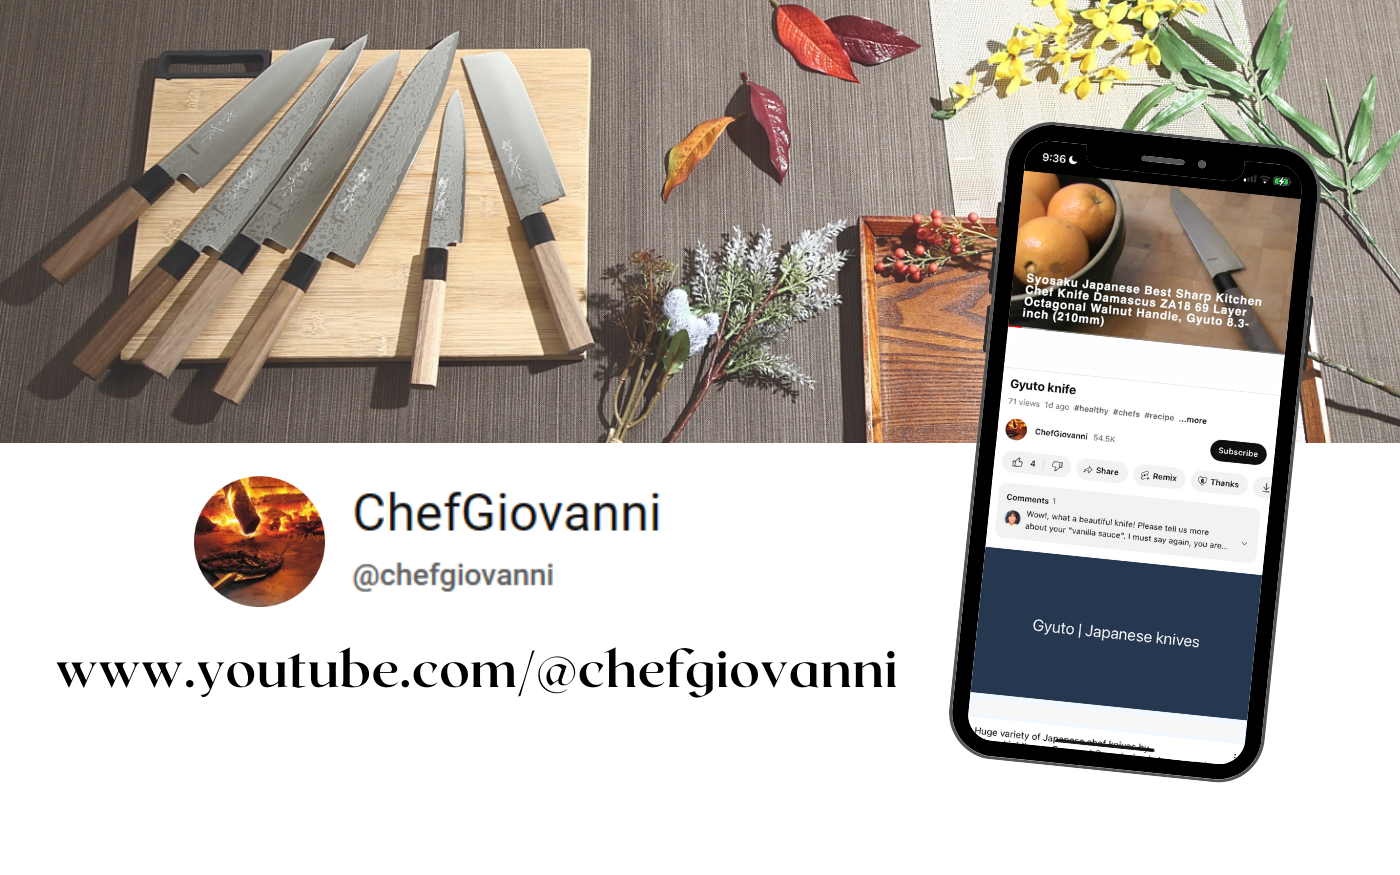 Featured in ChefGiovanni's YouTube Channel